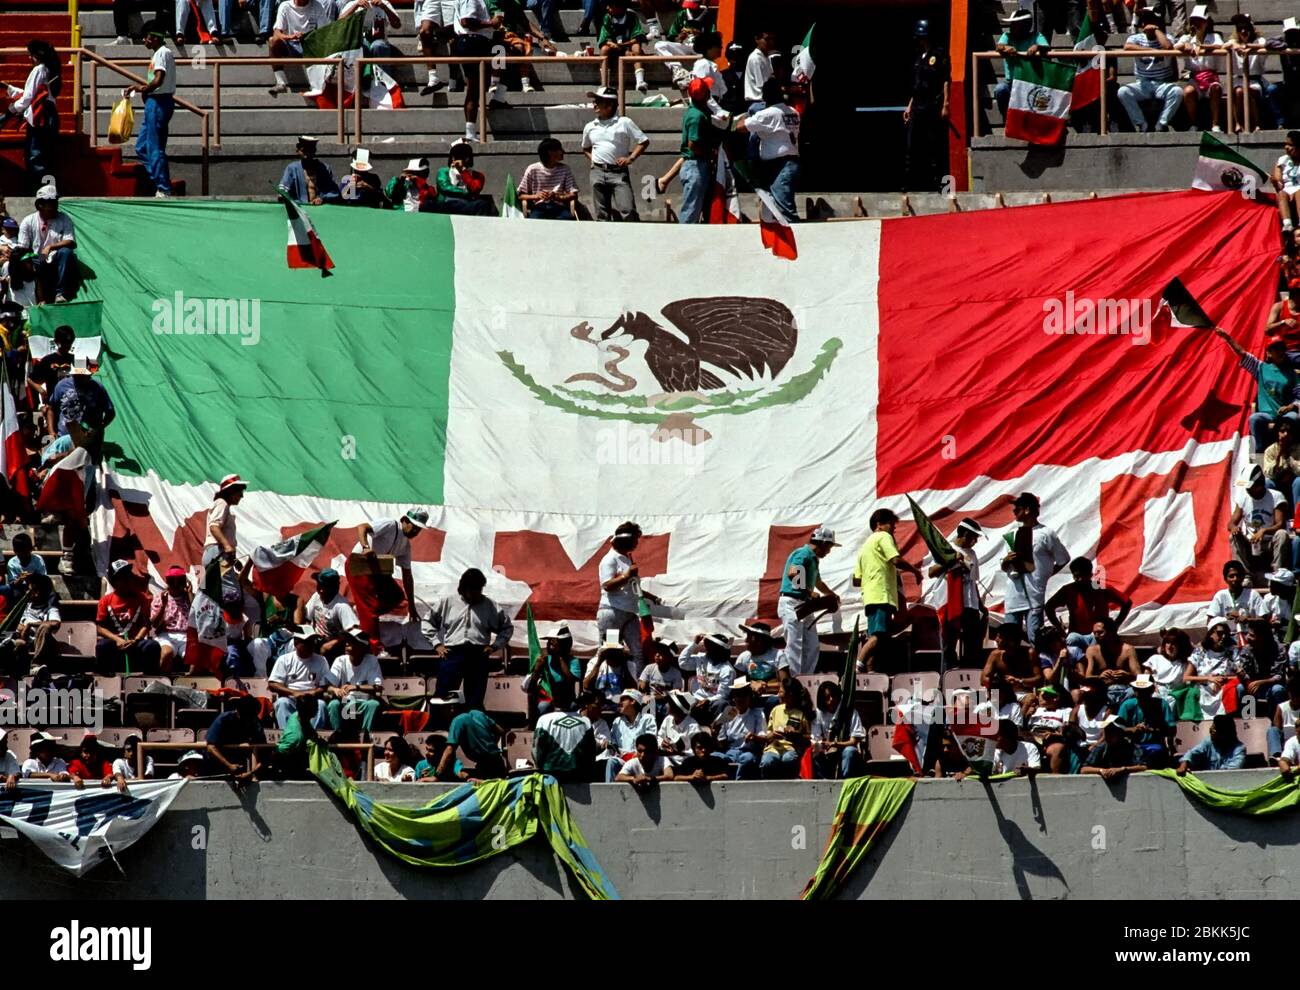 Giant flag in a Mexican stadium Stock Photo